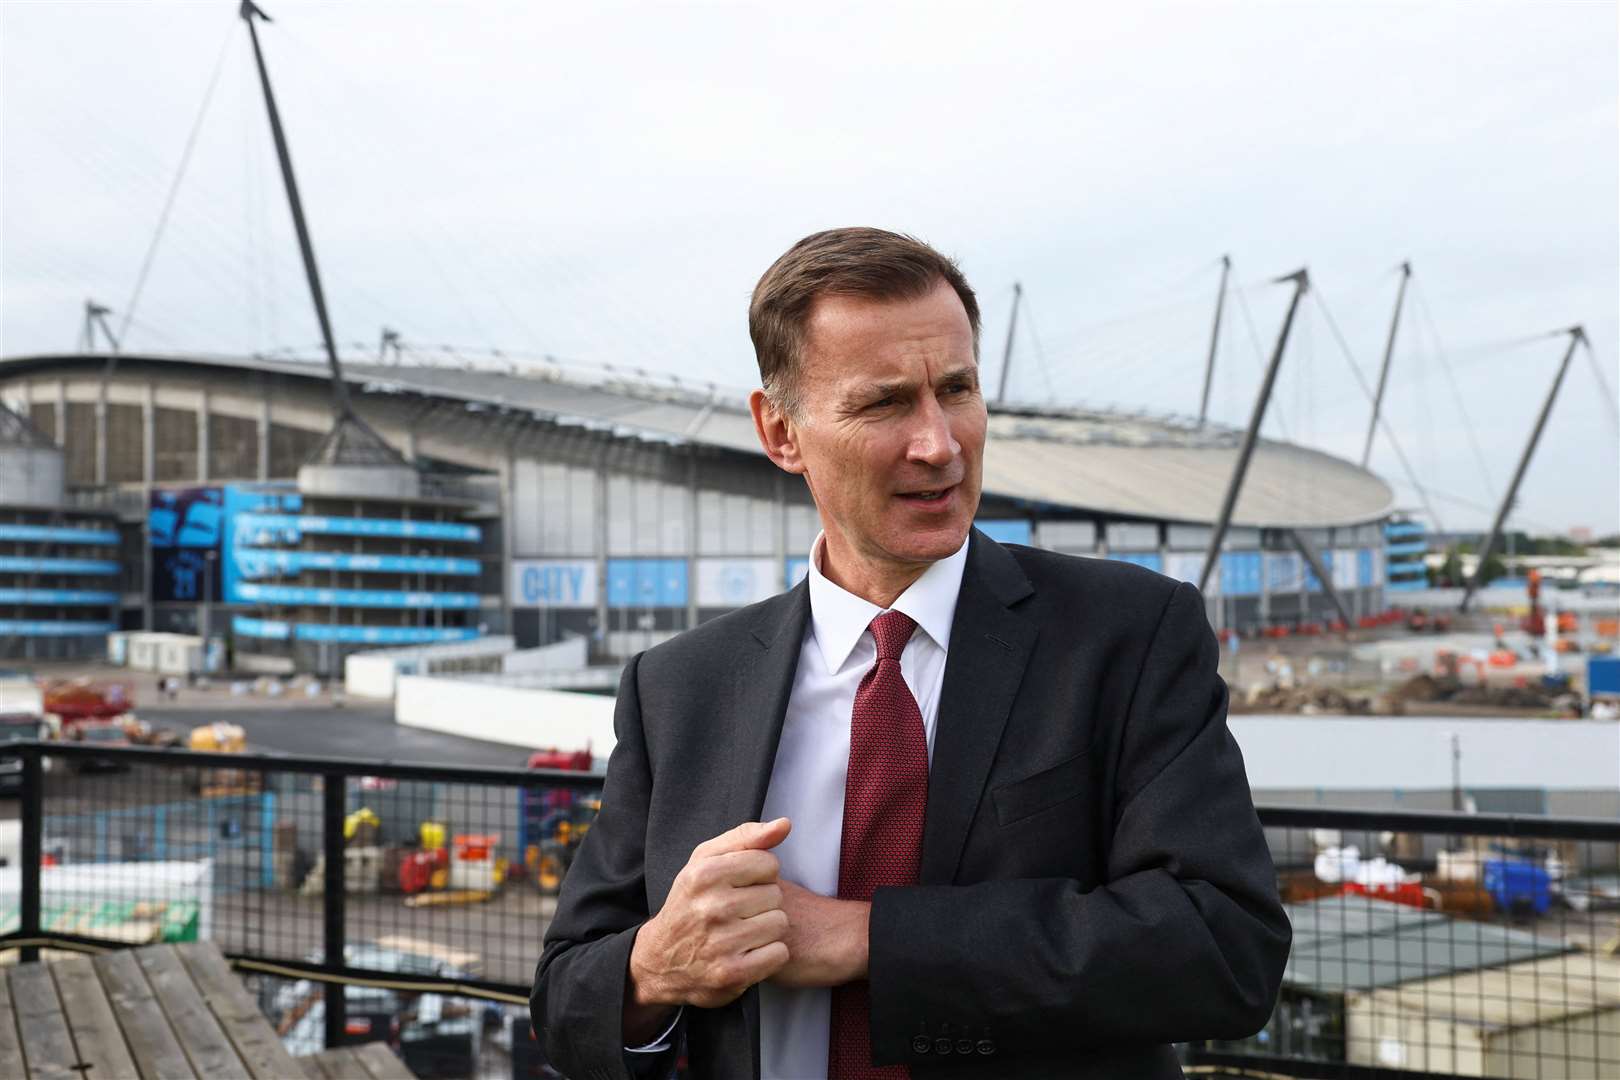 Chancellor of the Exchequer Jeremy Hunt has defended the need for skilled migration to help boost the economy (Toby Melville/PA)